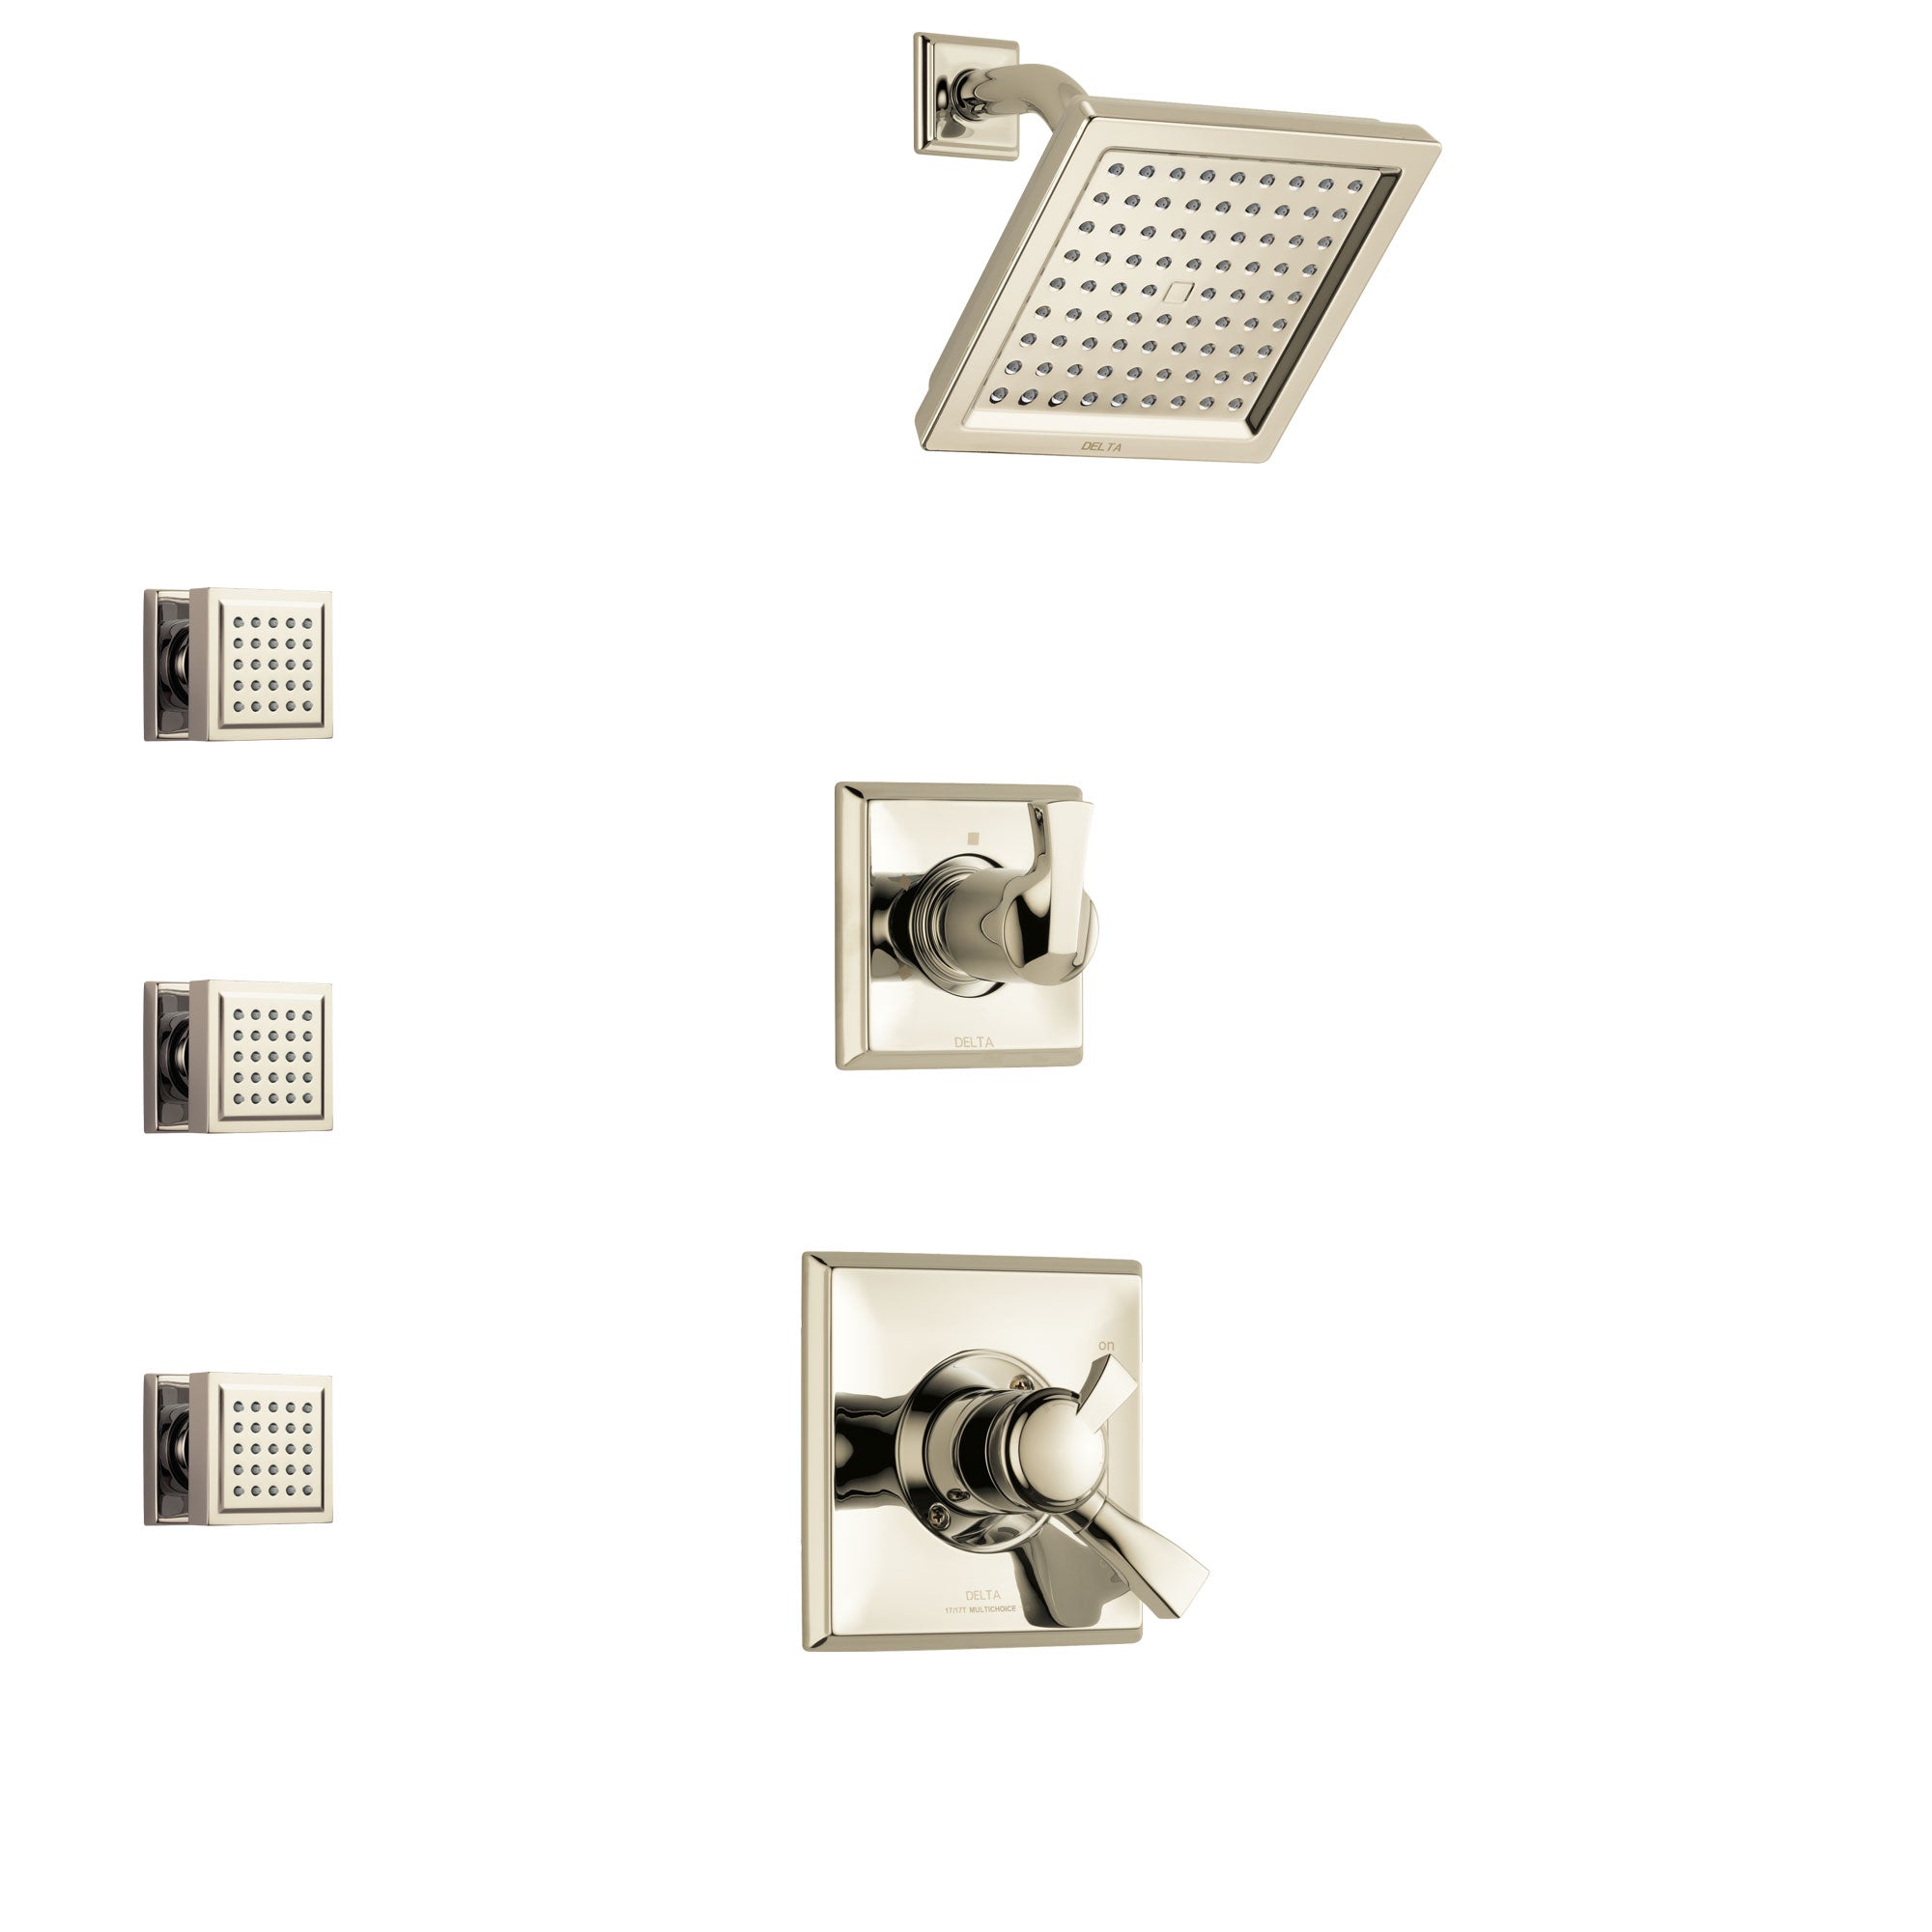 Delta Dryden Polished Nickel Finish Shower System with Dual Control Handle, 3-Setting Diverter, Showerhead, and 3 Body Sprays SS172511PN1